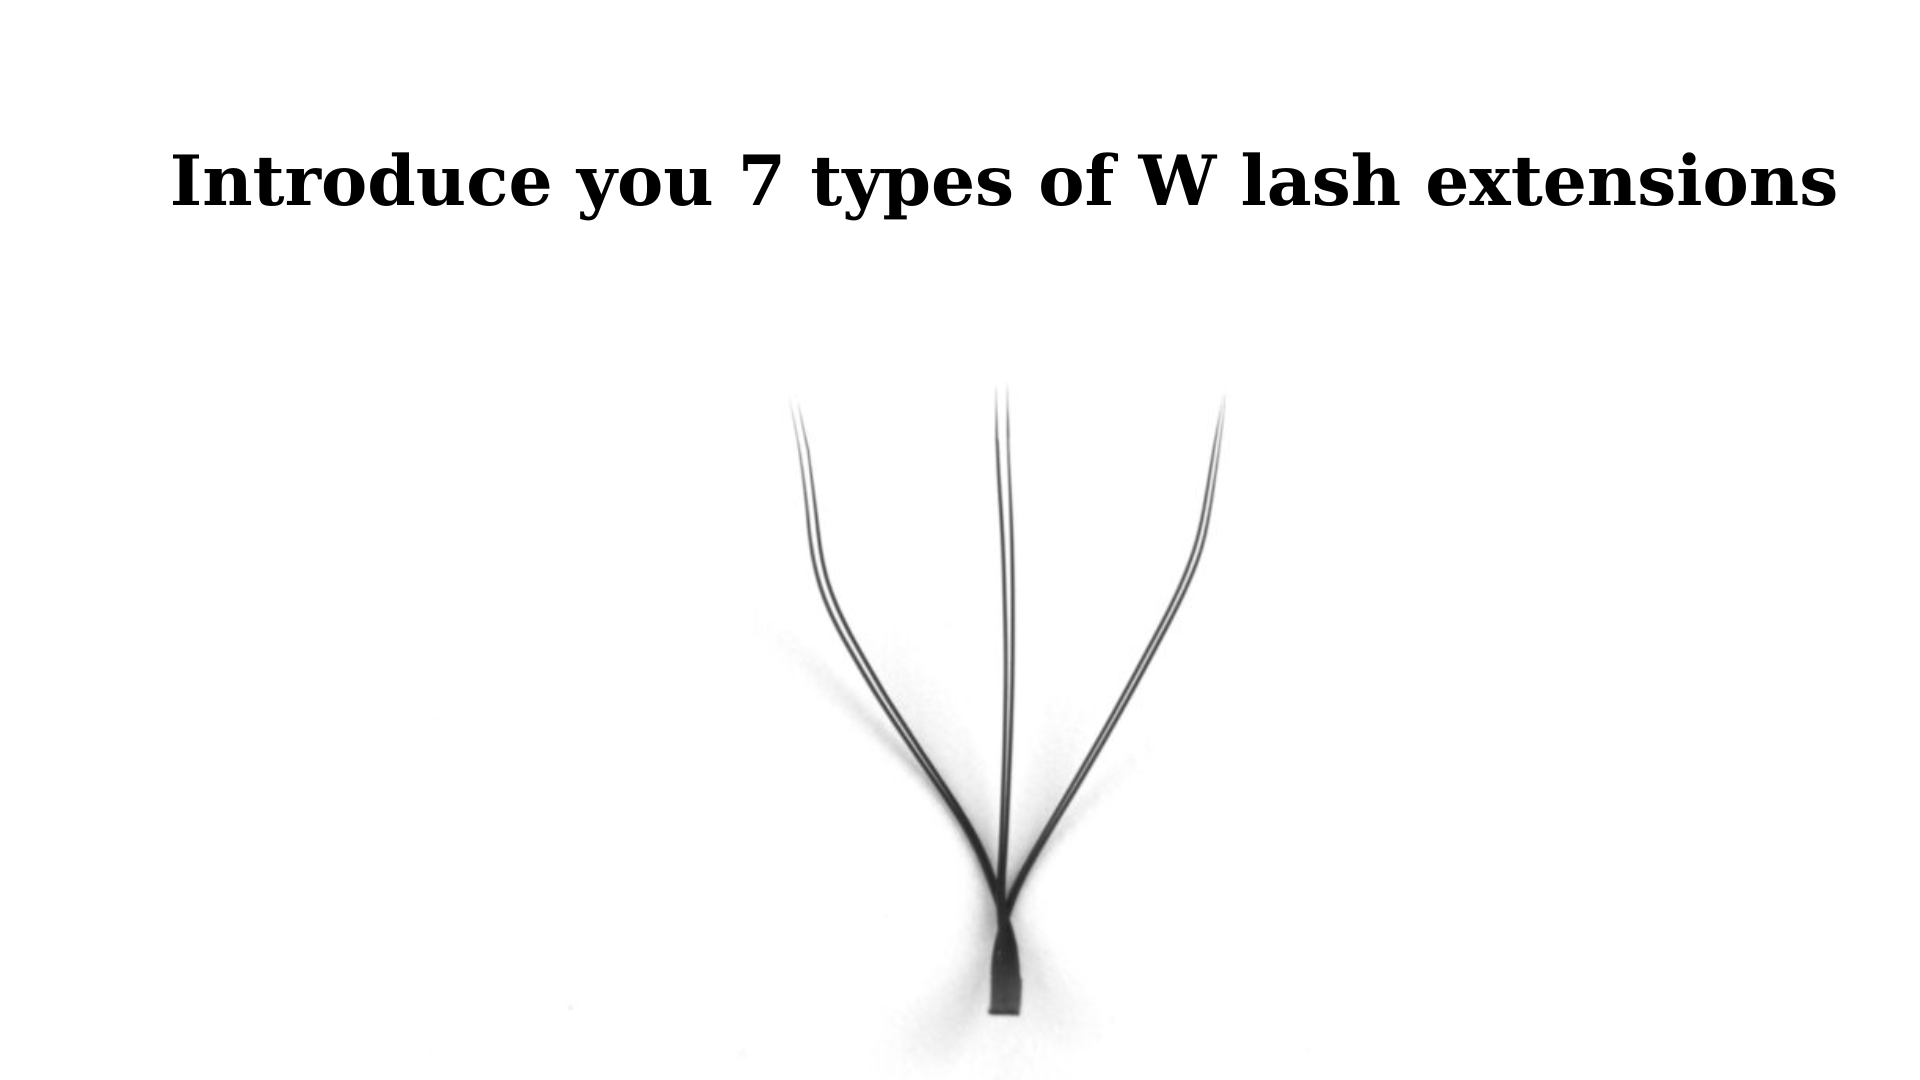 Introduce you 7 types of W lash extensions